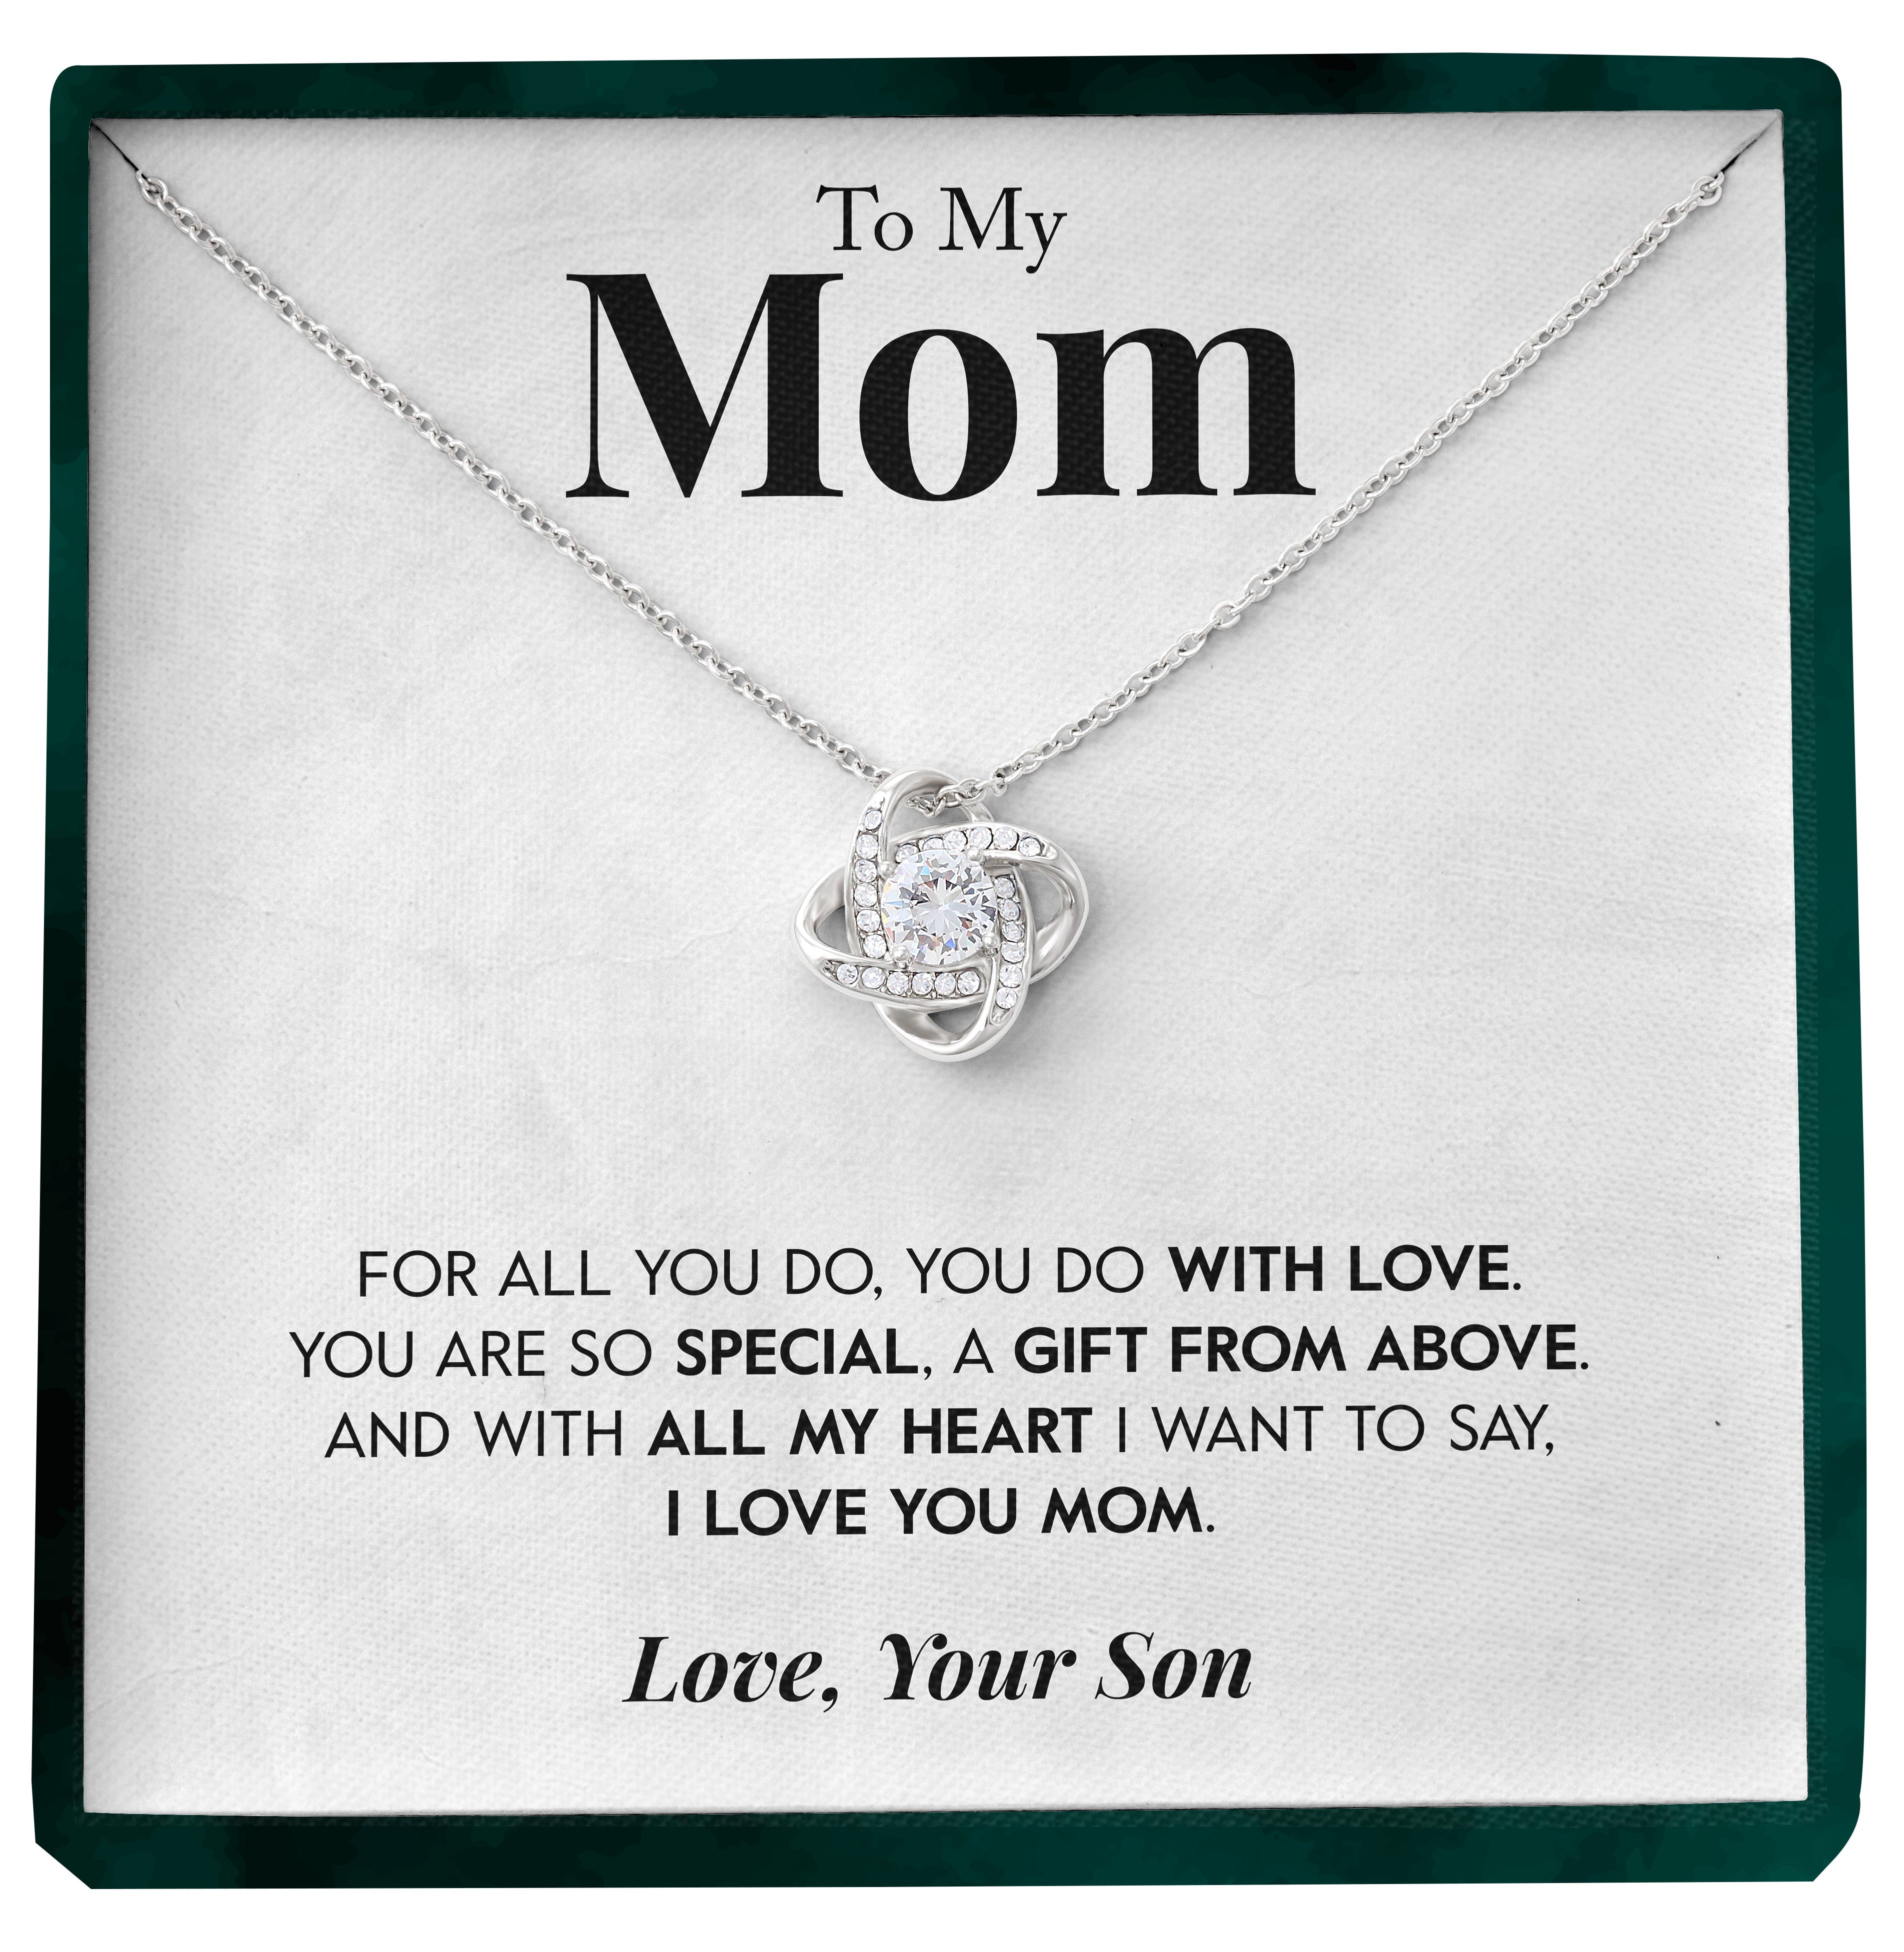 To My Mom | "Gift From Above" | Love Knot Necklace